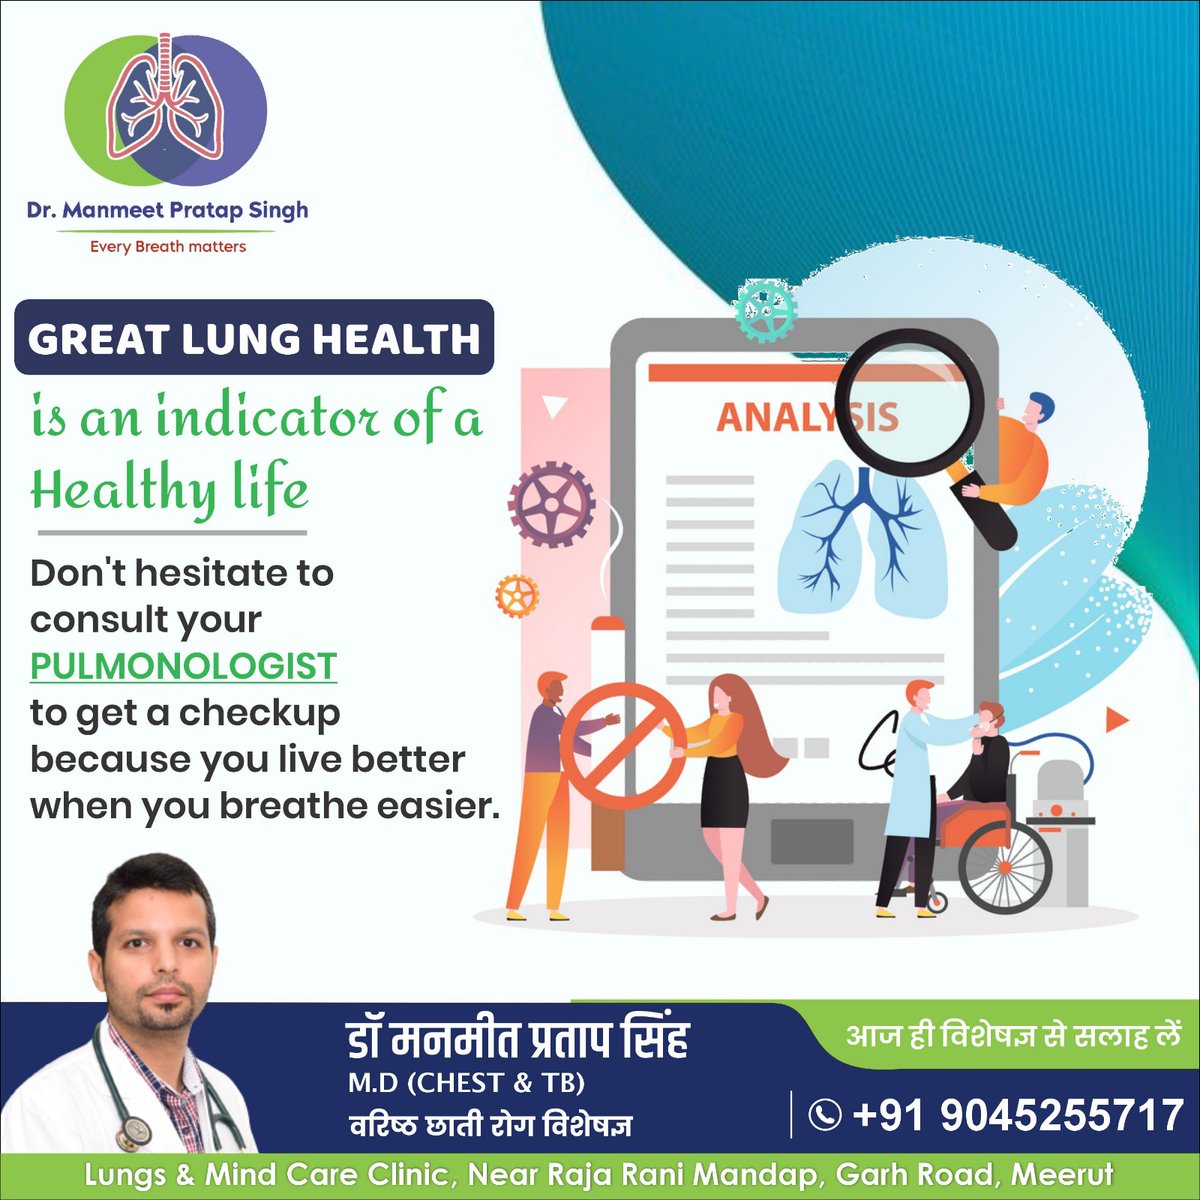 𝗚𝗥𝗘𝗔𝗧 𝗟𝗨𝗡𝗚 𝗛𝗘𝗔𝗟𝗧𝗛📷 is an indicator of a Healthy life
Don't hesitate to consult your 𝐏𝐔𝐋𝐌𝐎𝐍𝐎𝐋𝐎𝐆𝐈𝐒𝐓📷 to get a checkup📷 because you live better when you breathe📷 easier.
#drmanmeetpratapsingh #pulmonologist #lungsspecialist #covid #lungshealth